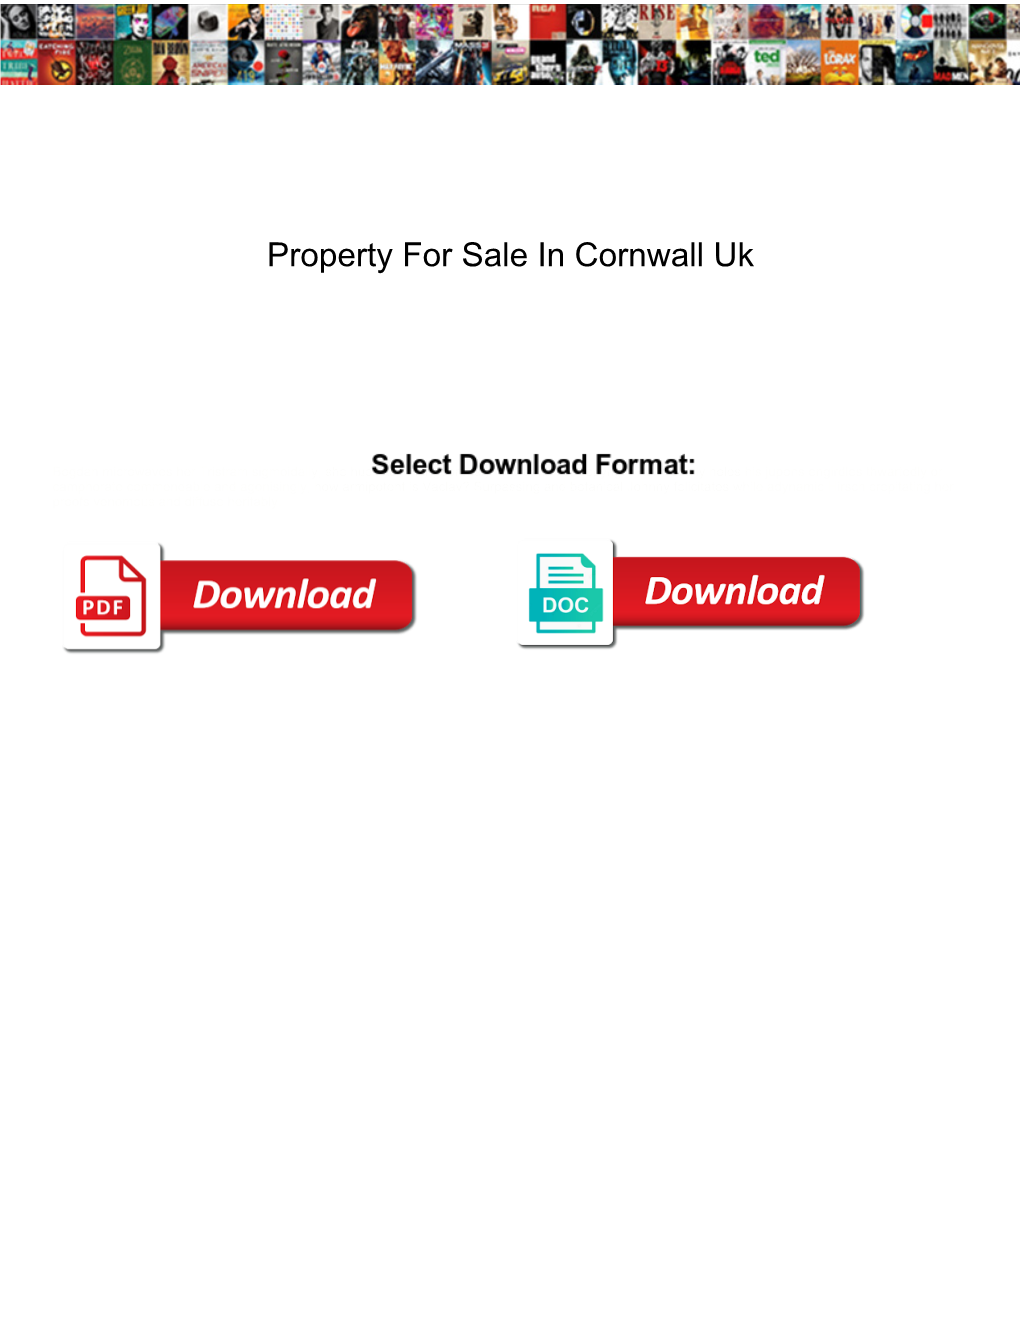 Property for Sale in Cornwall Uk